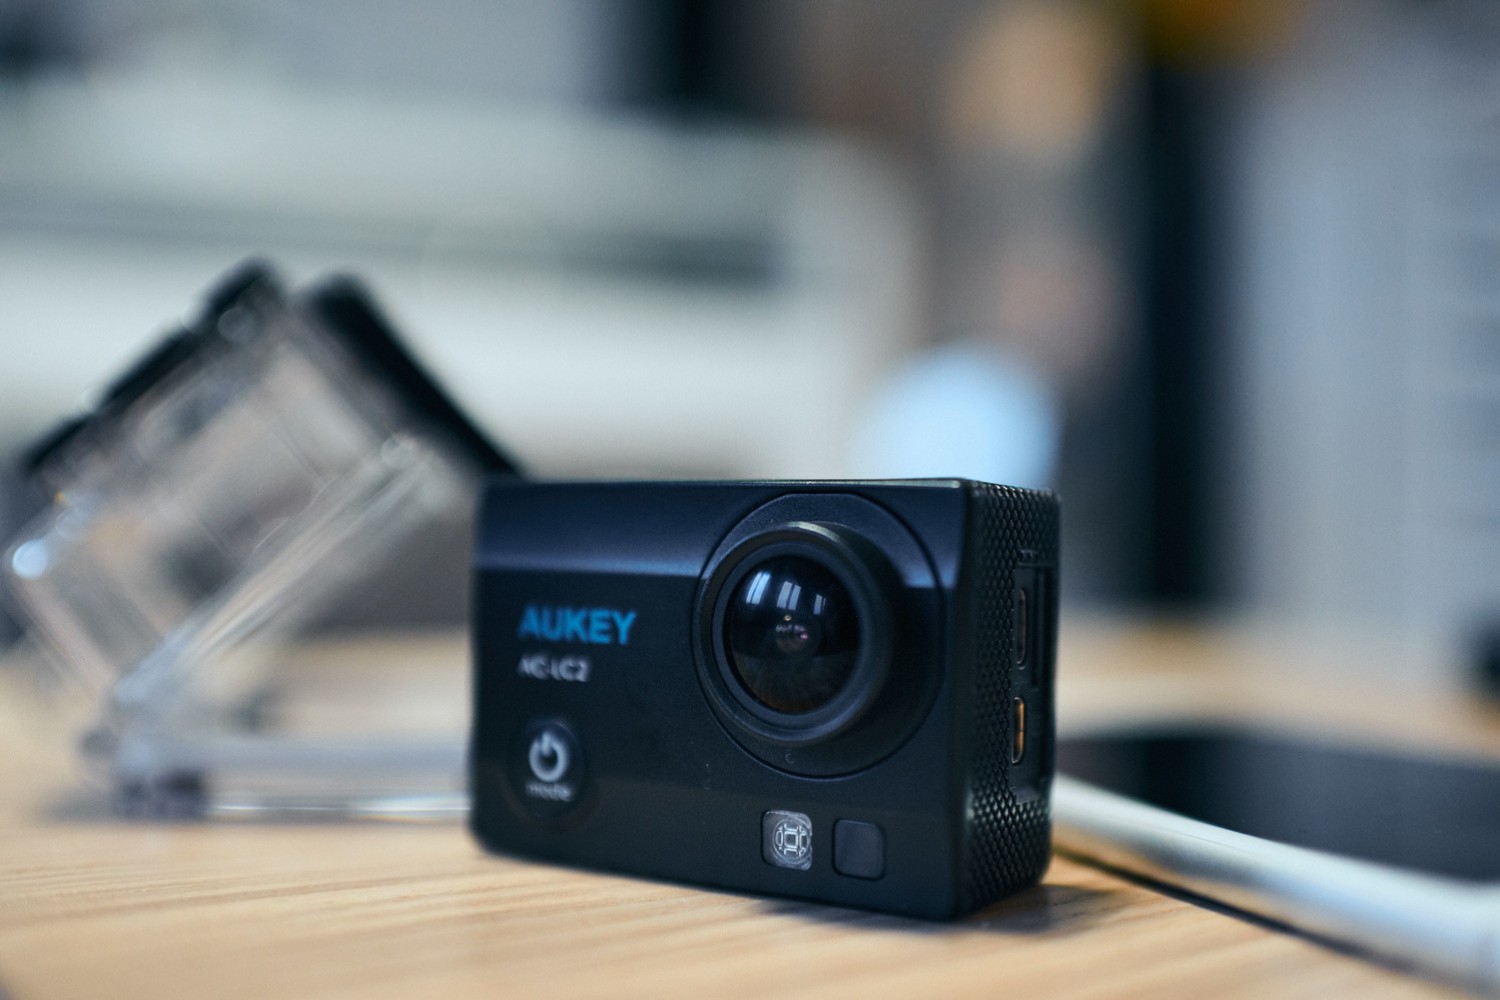 Aukey Sports Action Camera: How To Download Pictures Onto Mac